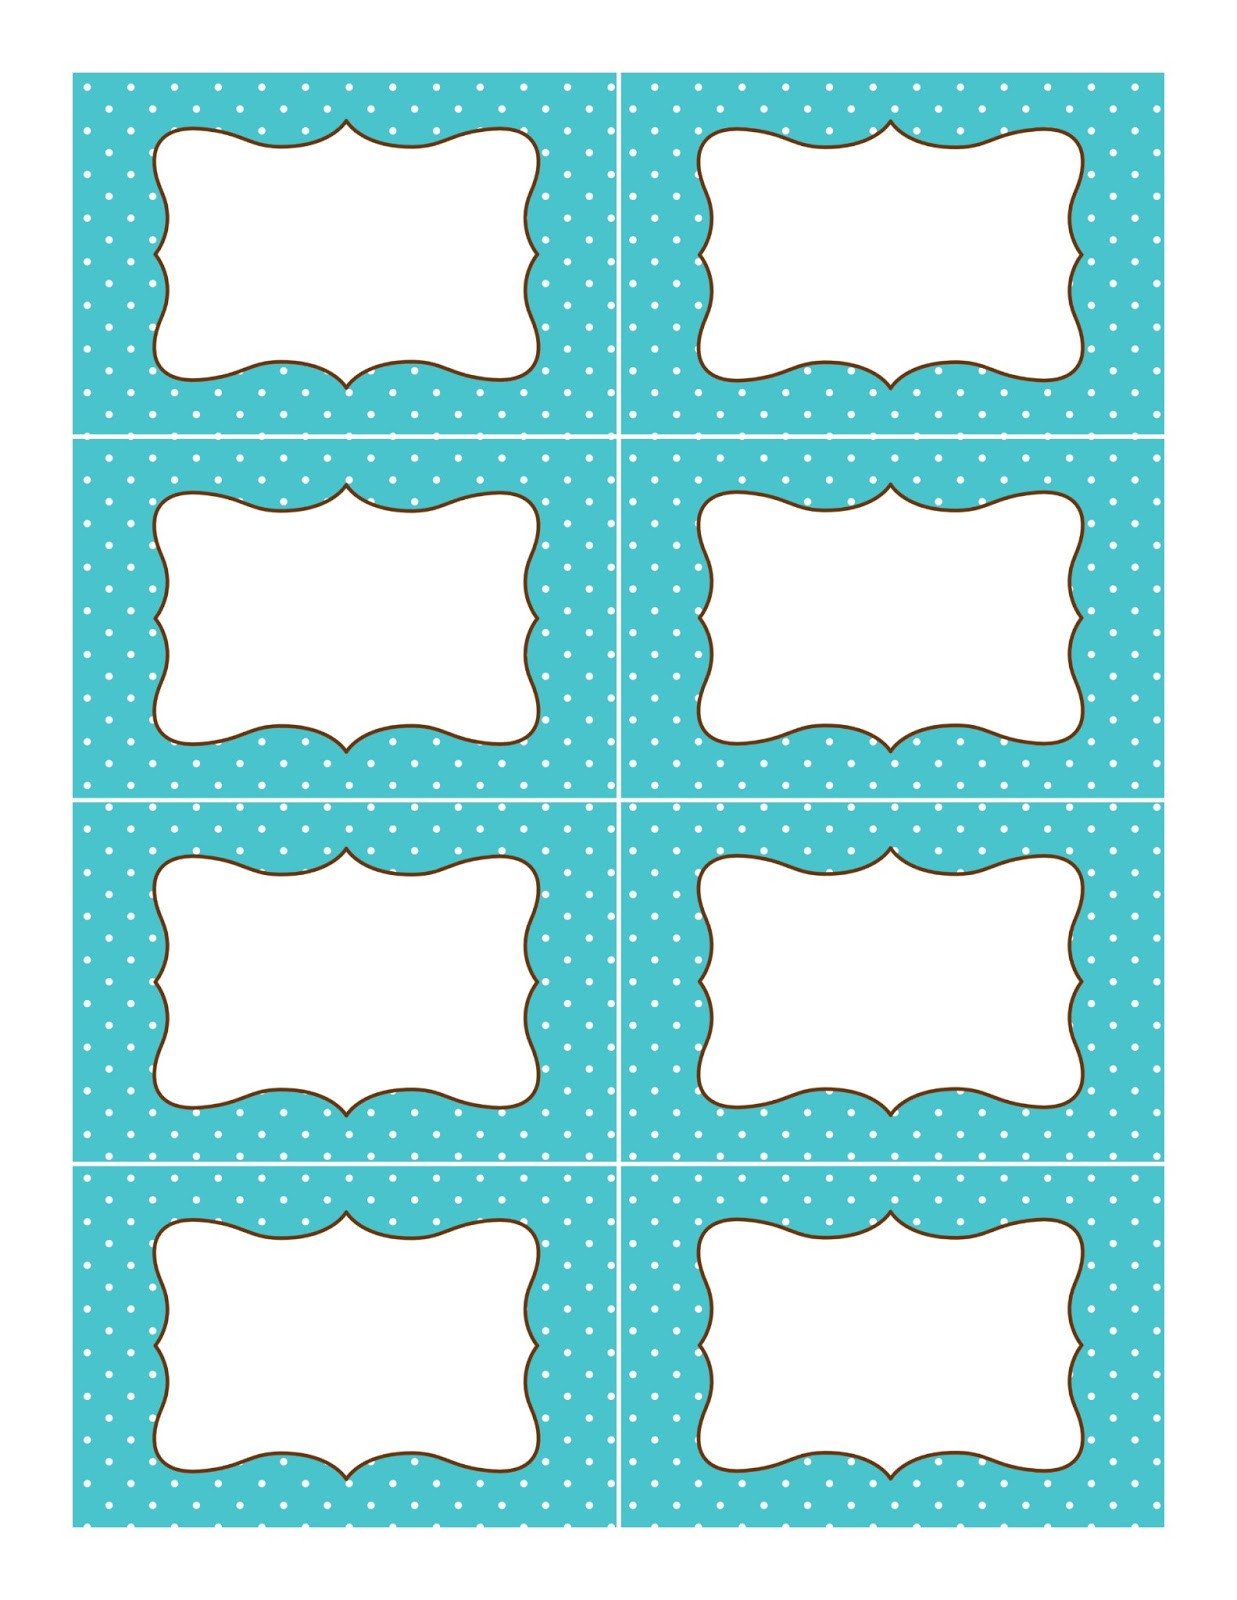 Free Online Label Templates 1000 Ideas About Polka Dot Labels On Pinterest